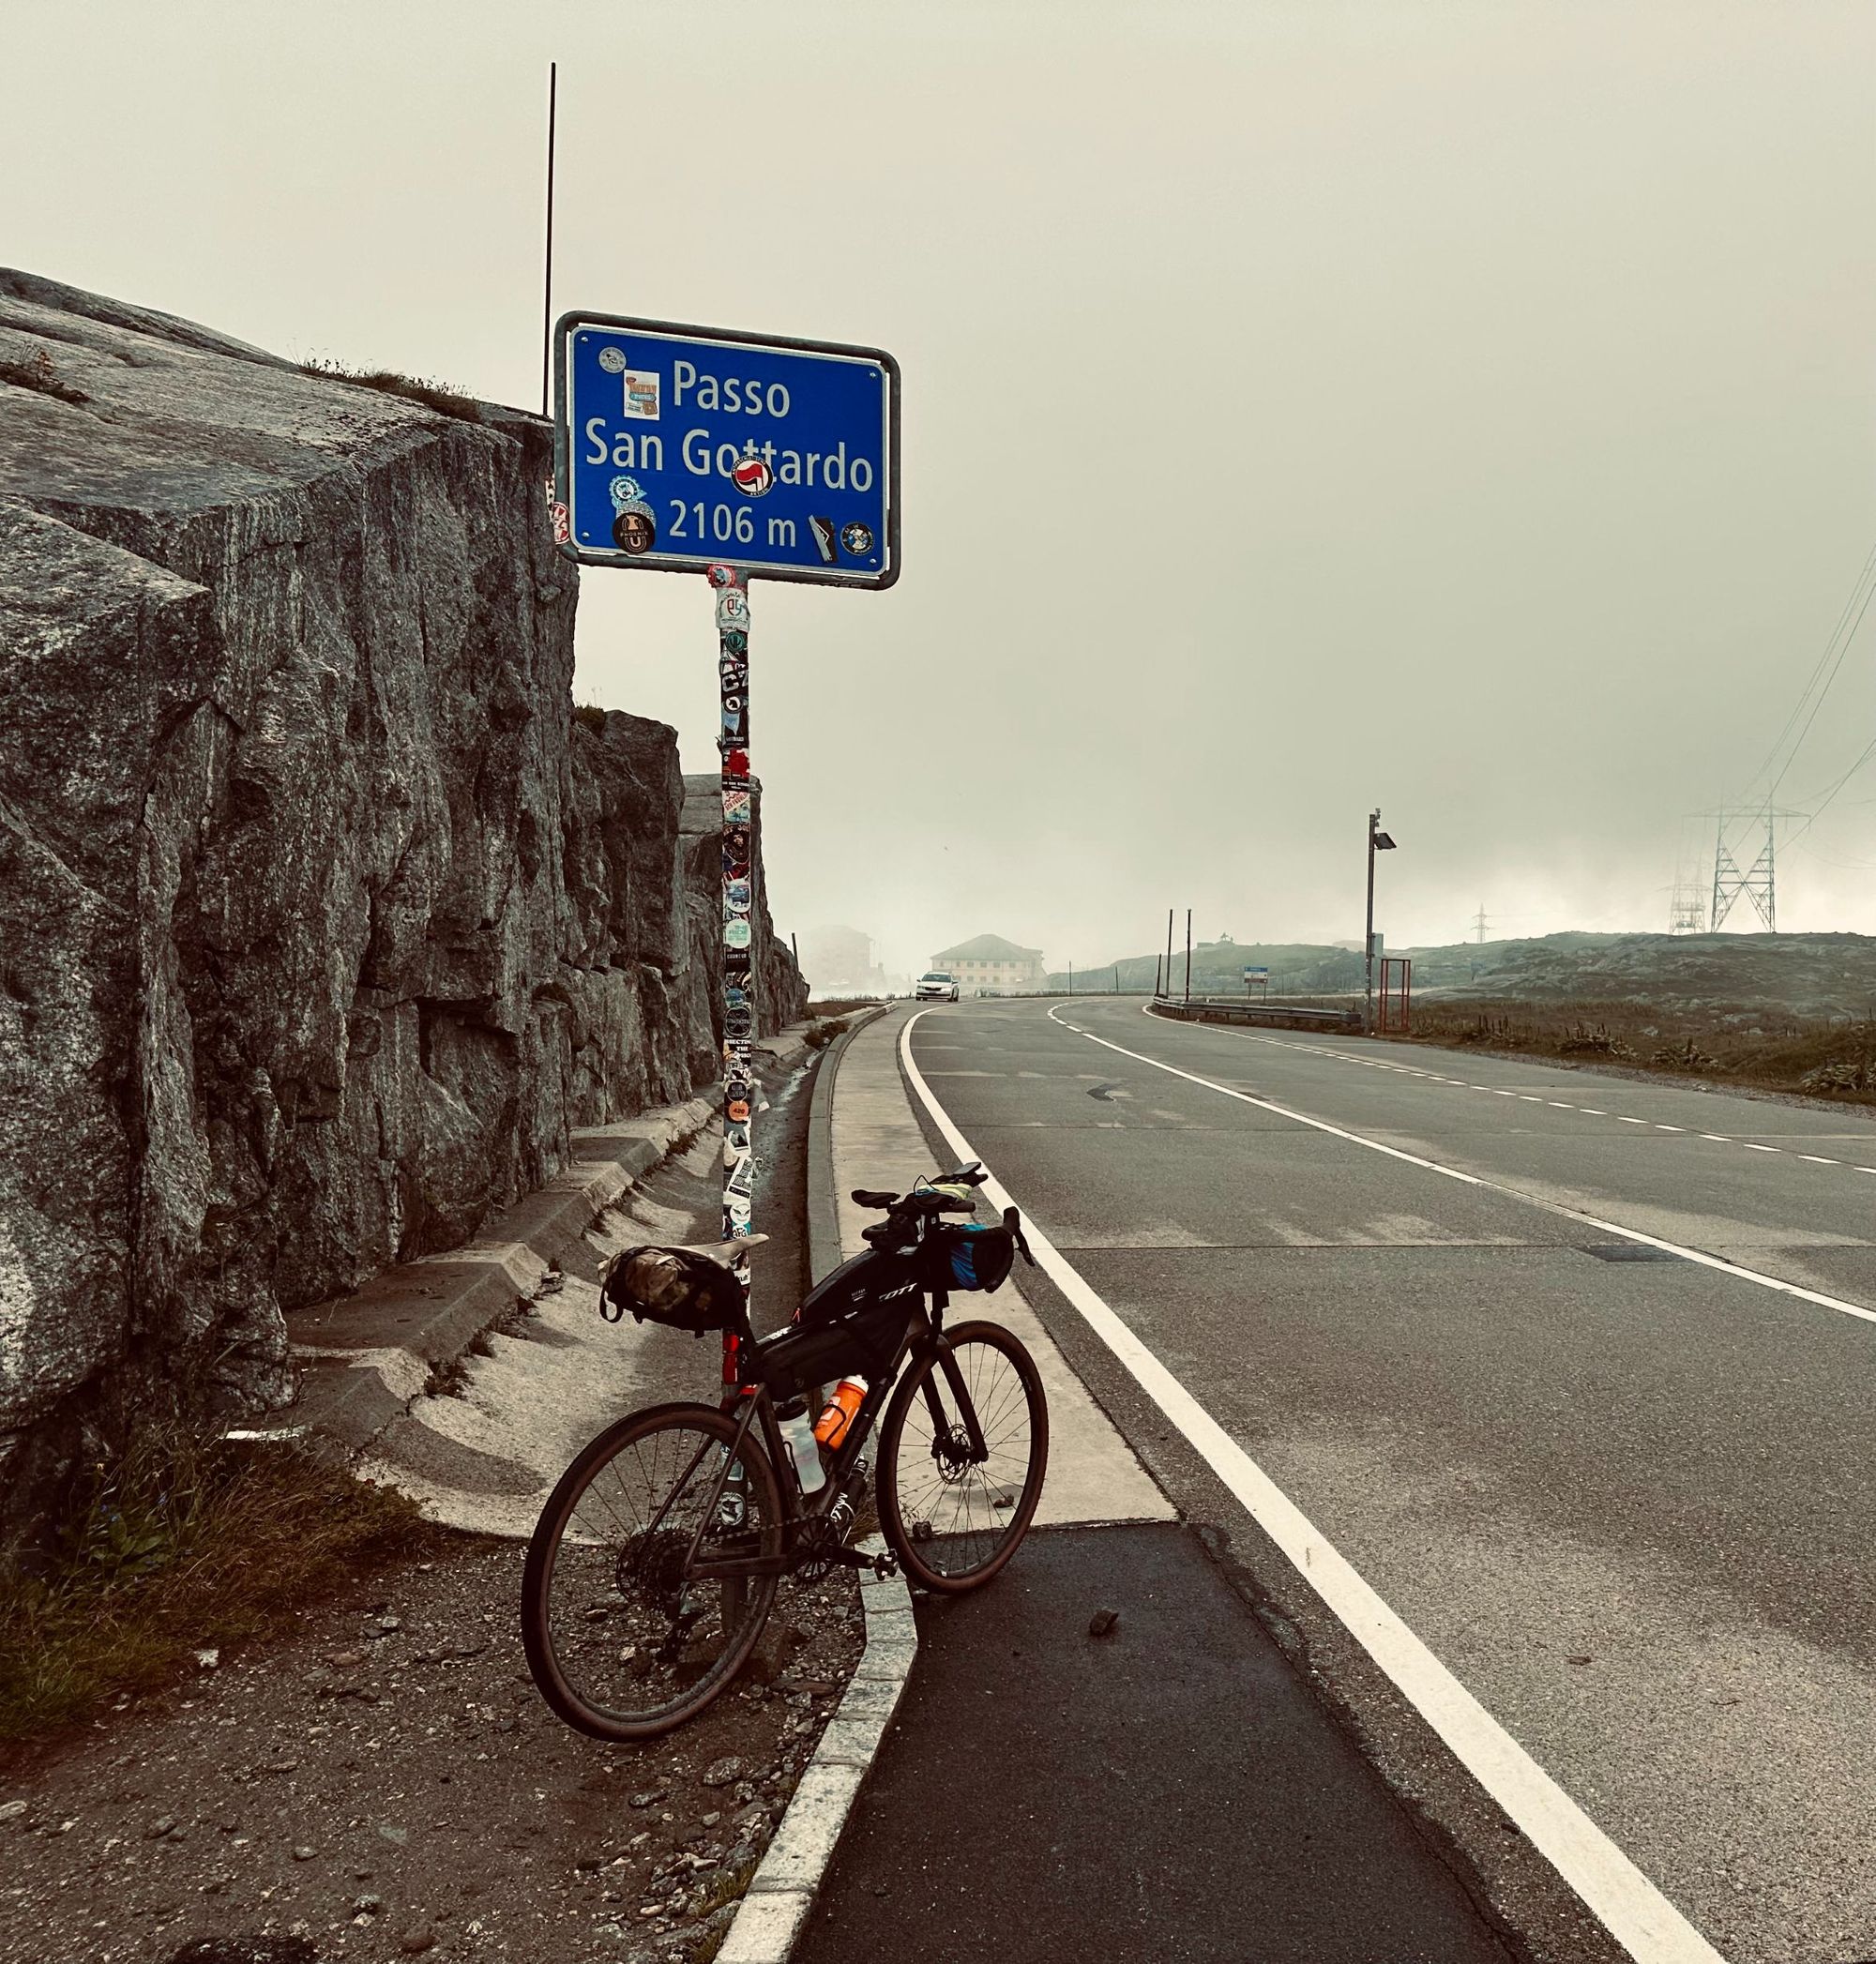 The signage leading to the Passo San Gottardo, connecting northern Switzerland with southern Switzerland, also known as Gotthard Pass. Photo: Guy Bowden